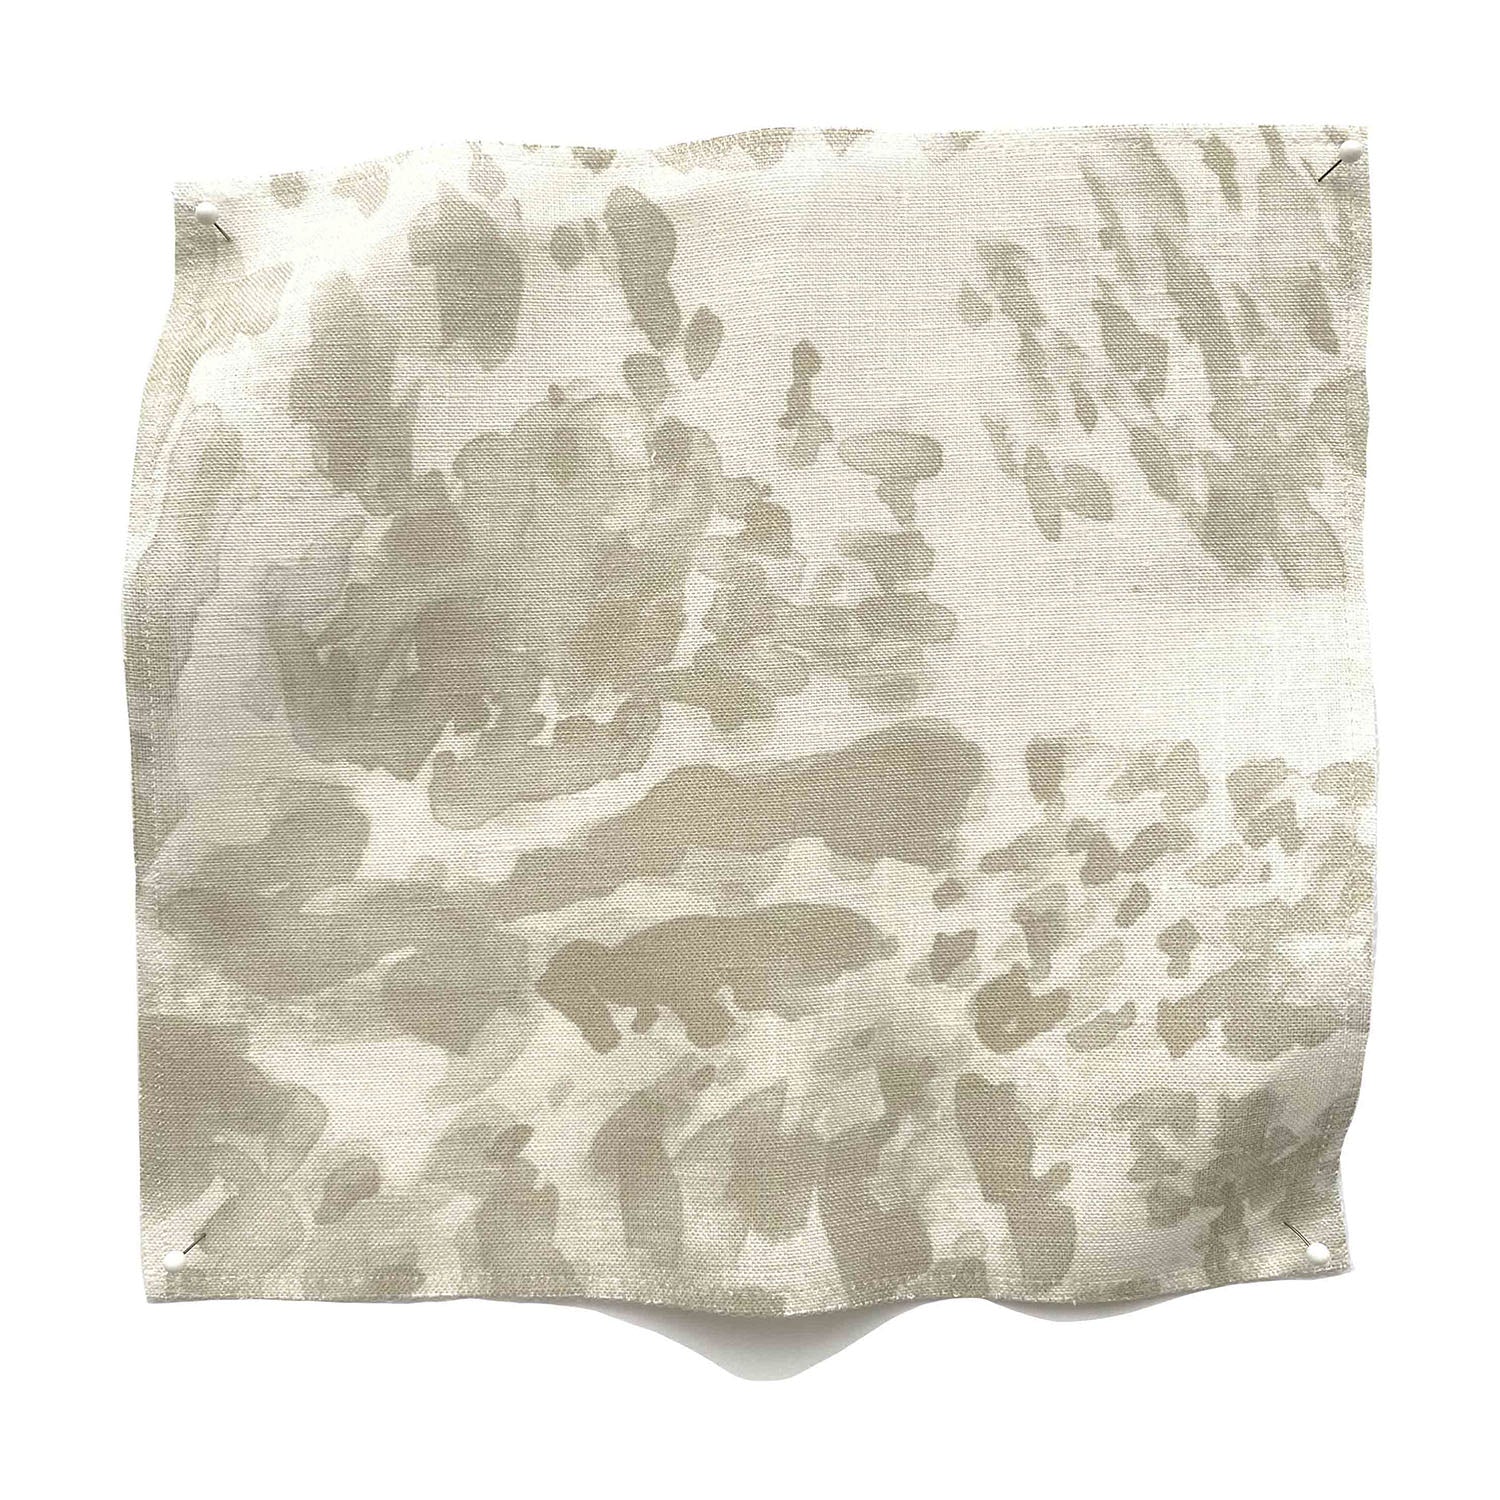 Square fabric swatch in a painterly cloud print in shades of tan on a cream field.